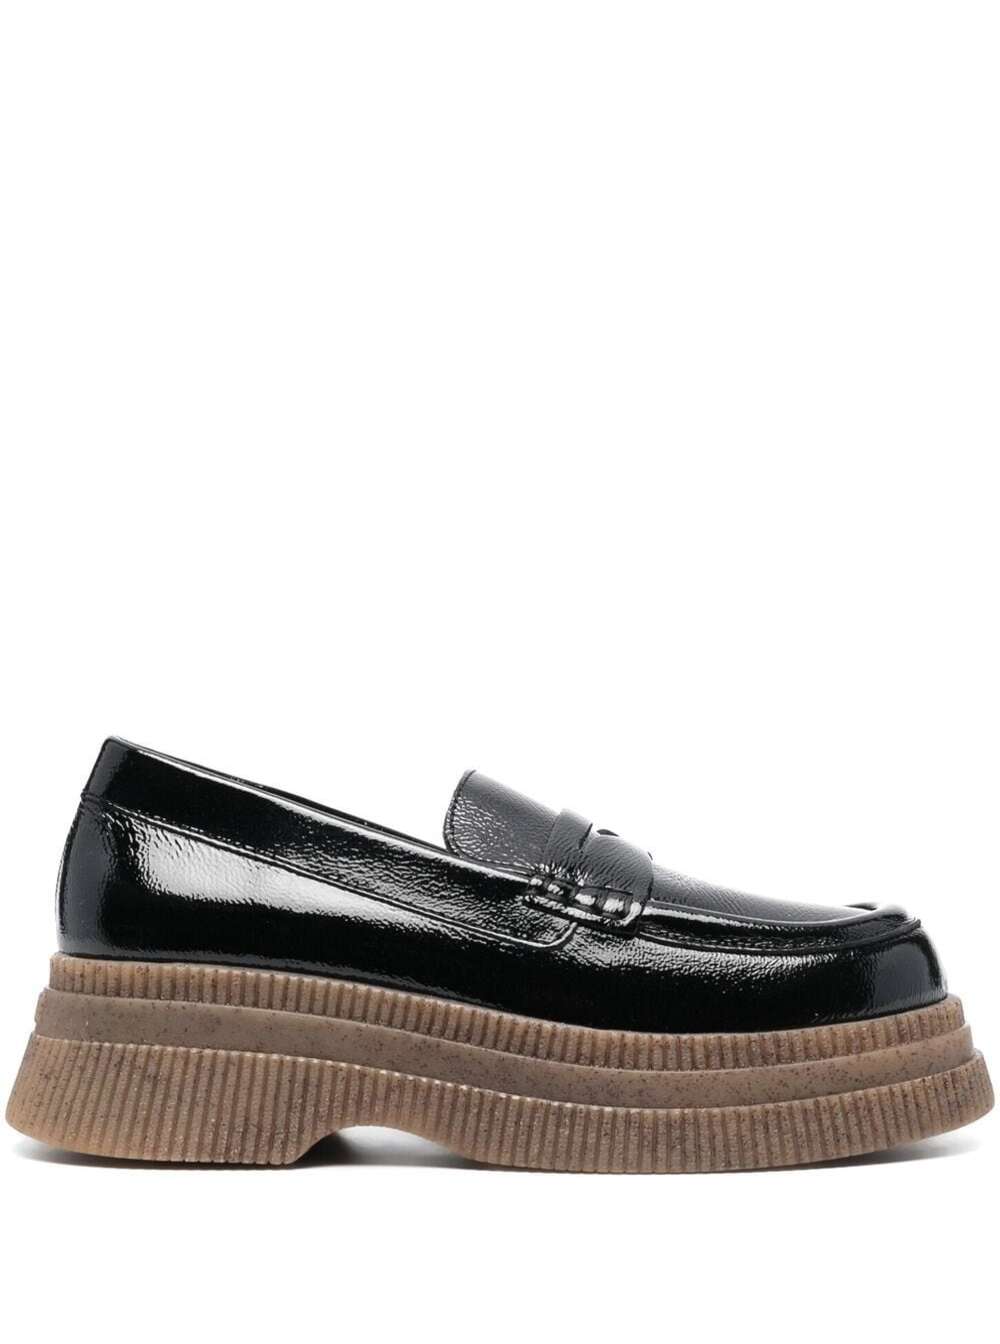 Ganni Creepers Wallaby Loafer